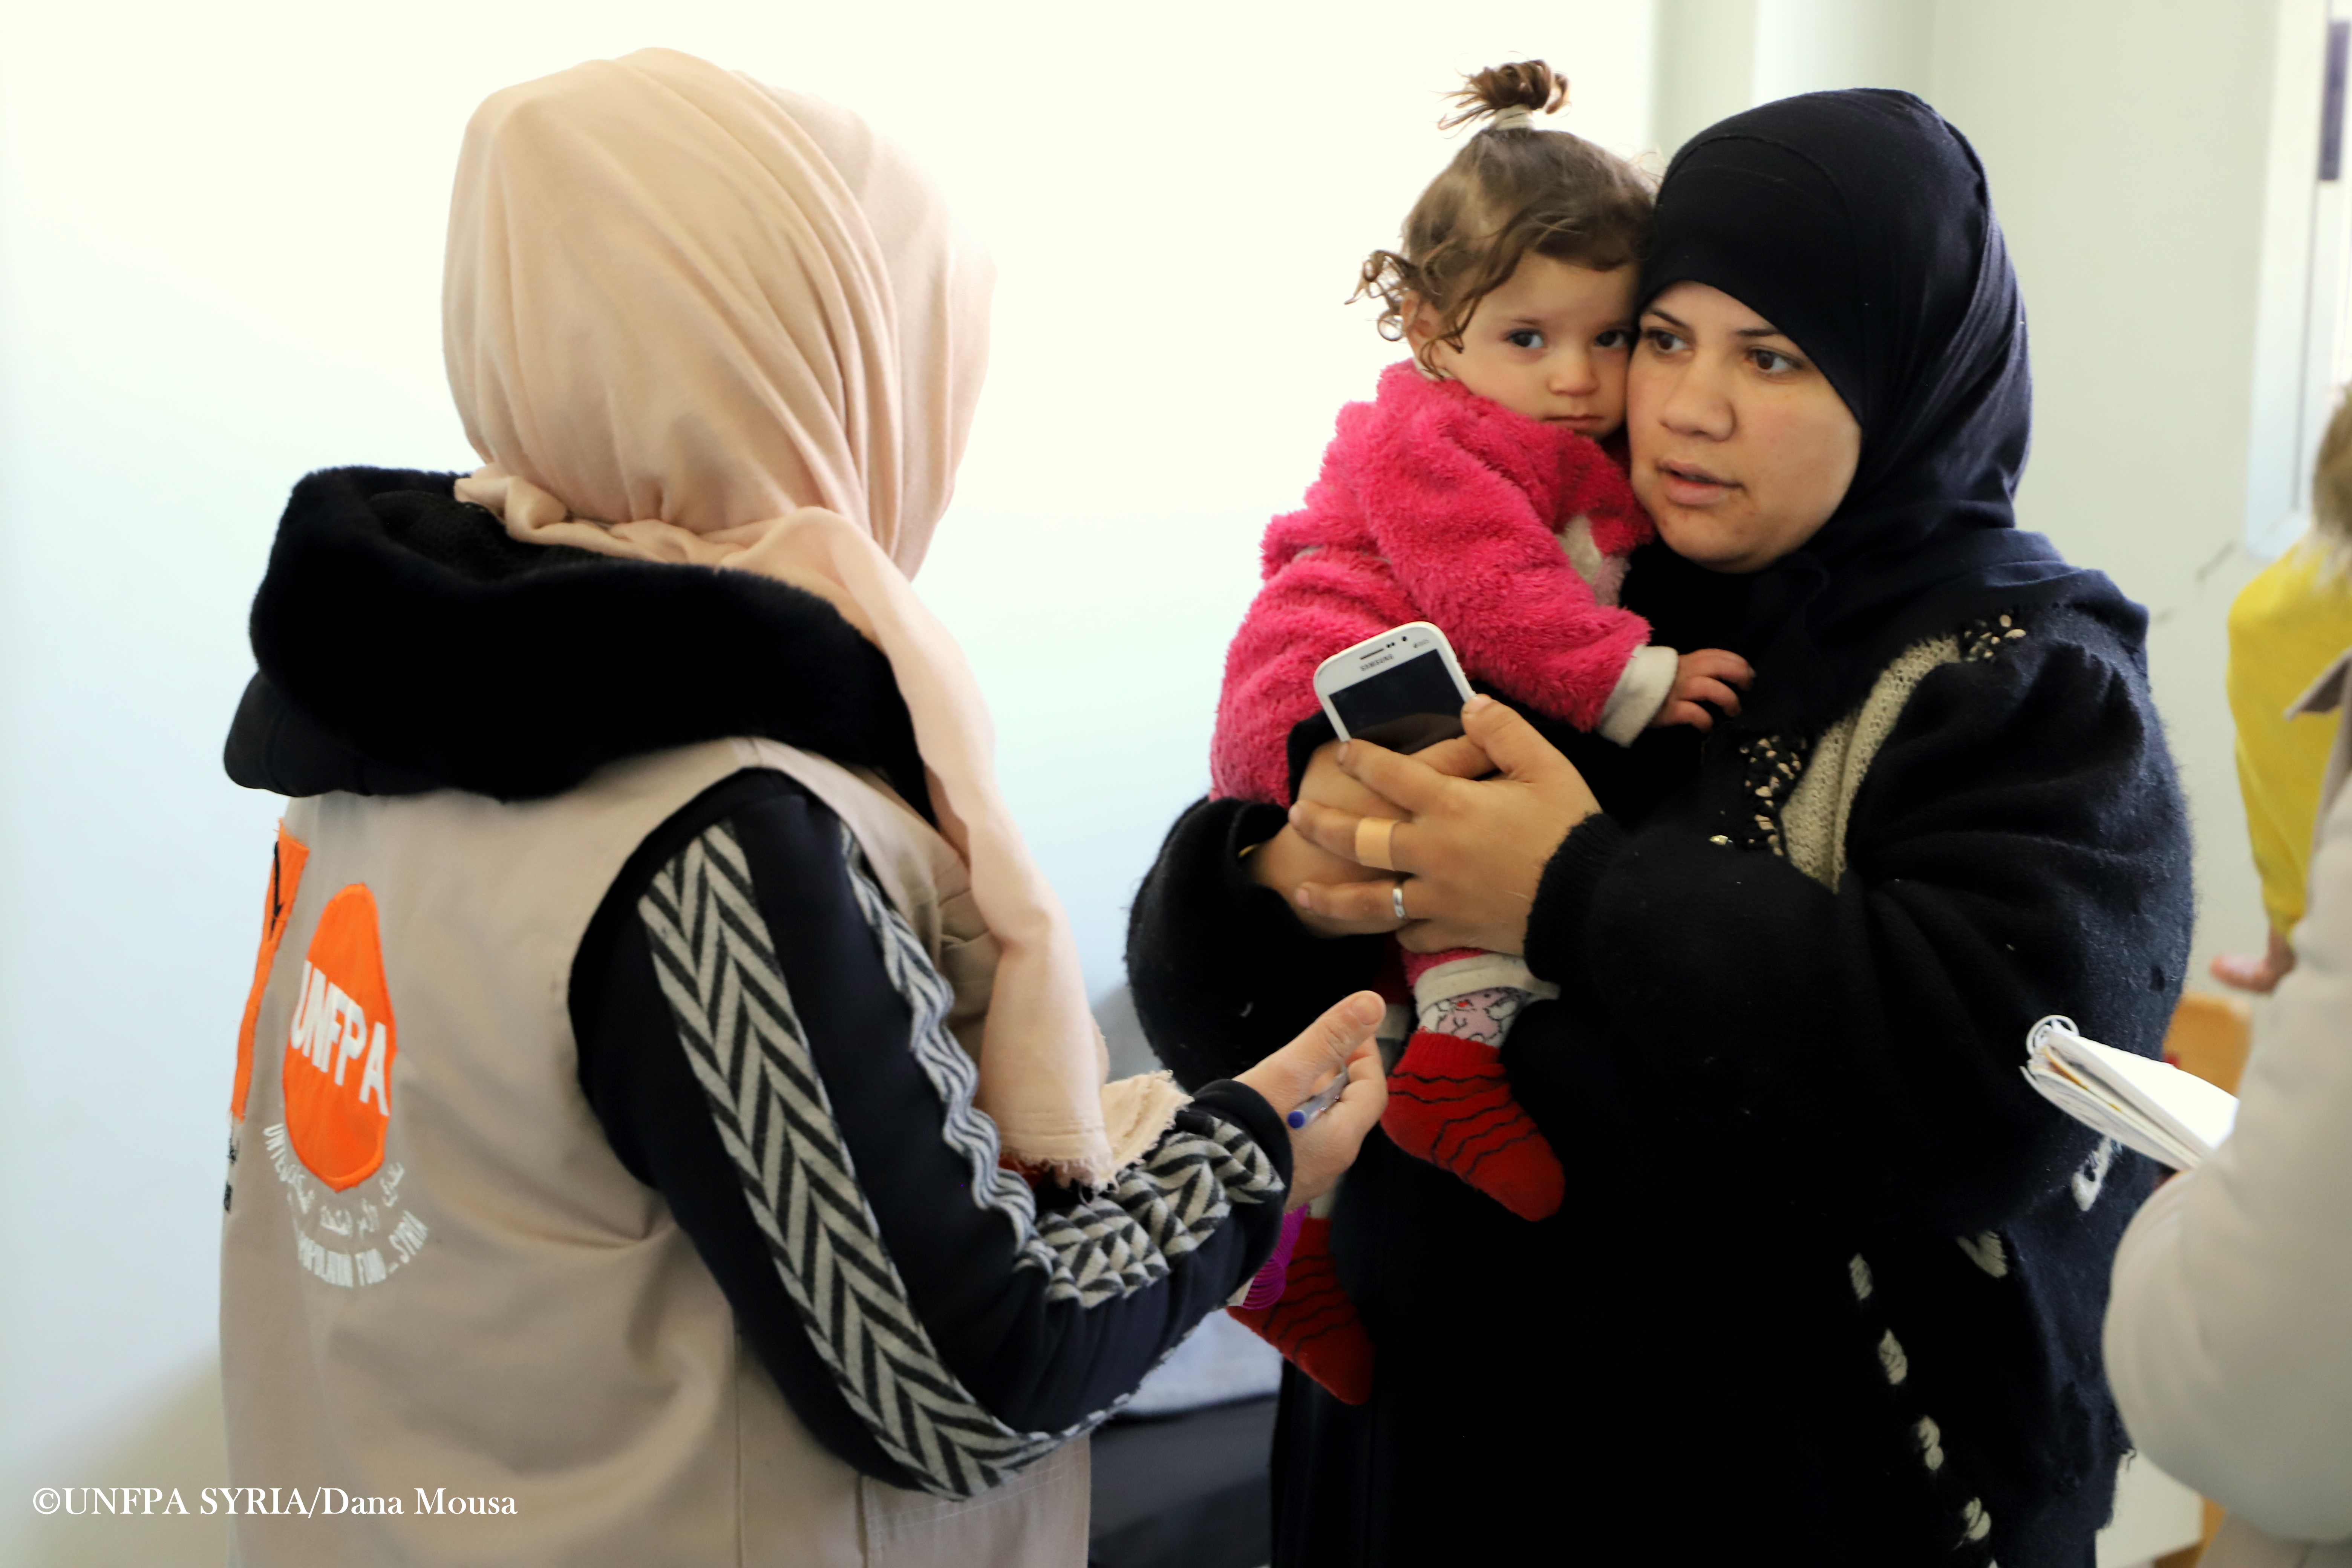 UNFPA Arabstates  Syria: Women and girls' rights are a casualty